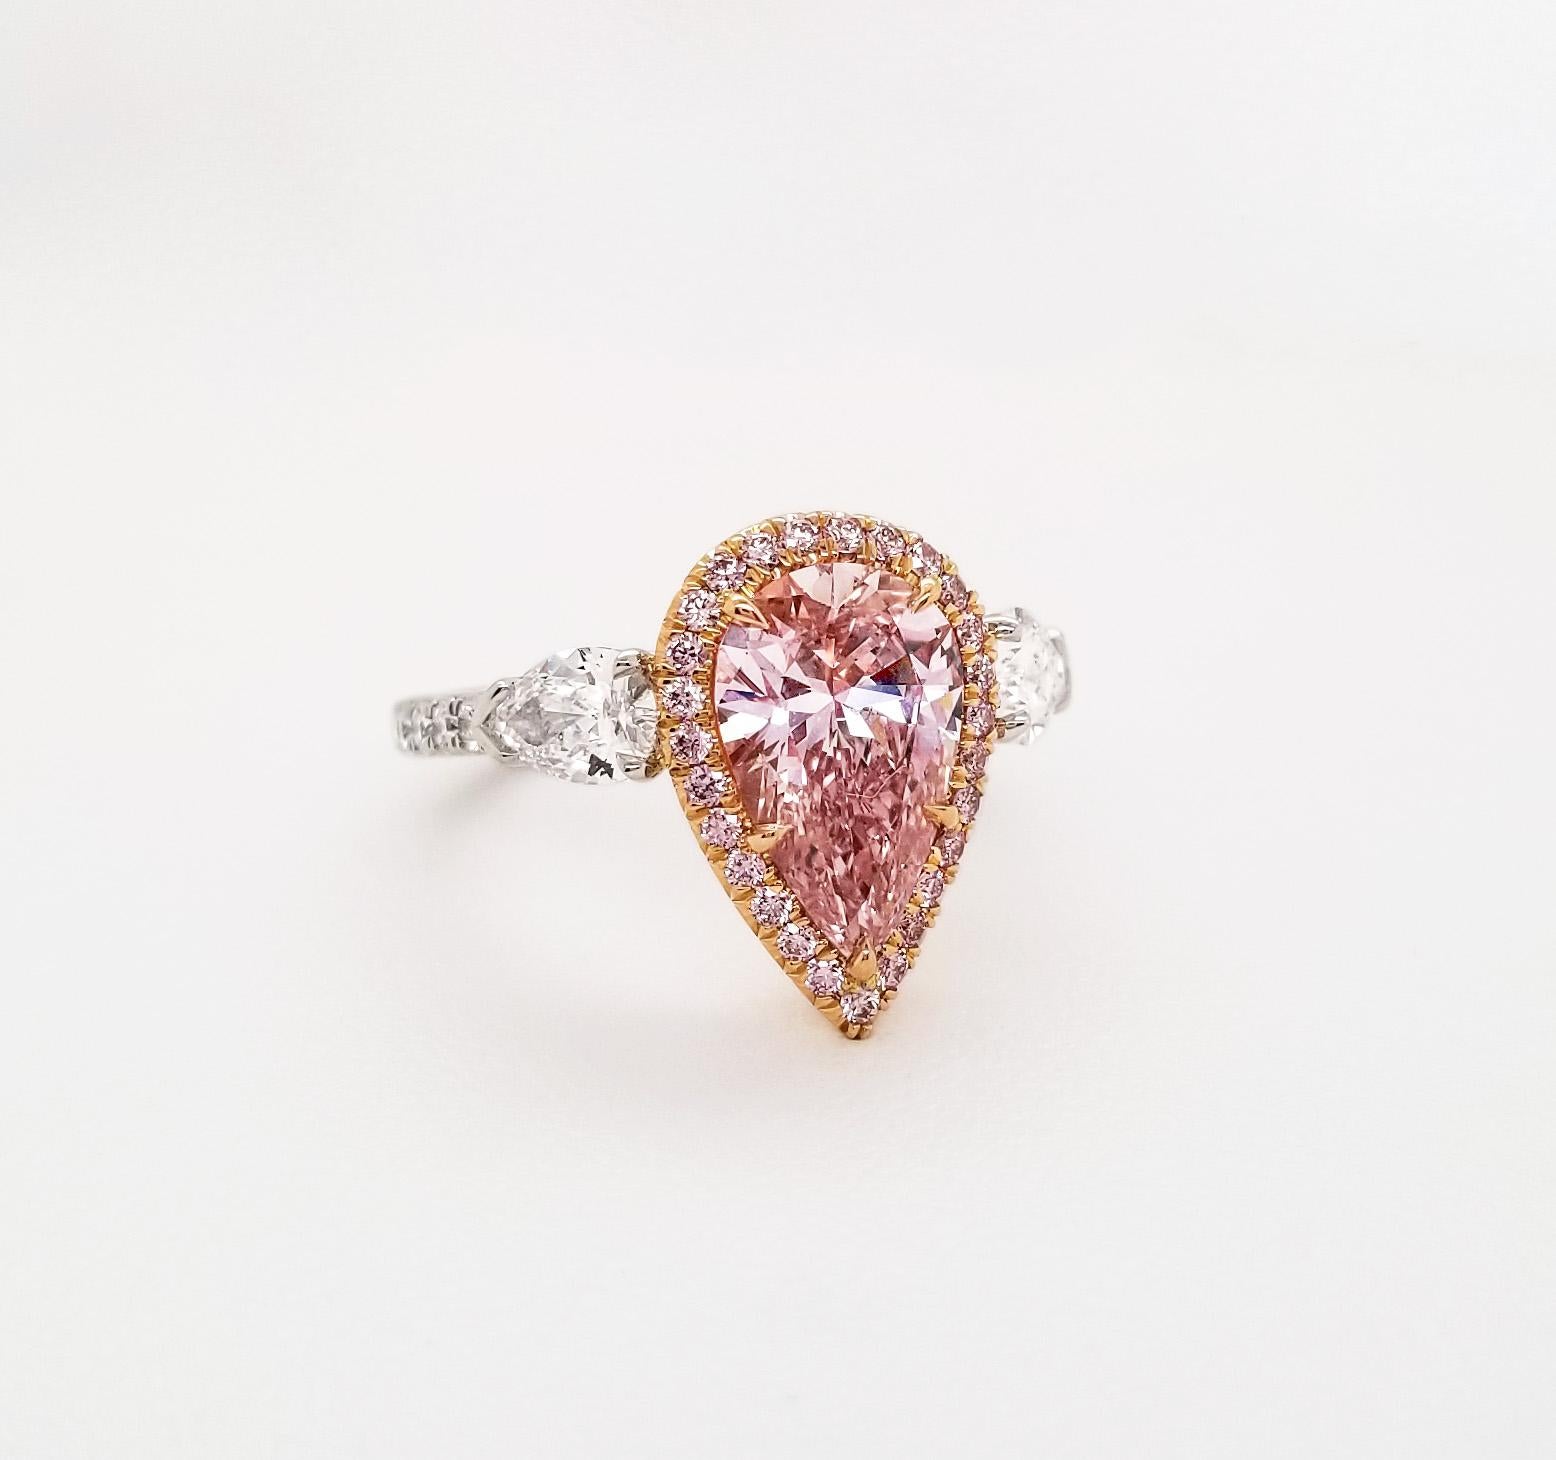 From SCARSELLI, this 2.01-carat fancy pink pear shape Diamond GIA certified (see certificate picture for detailed stone's information). The center diamond enhanced by 0.23ct round brilliant pink is flanked by a pair of 0.79ct white pear shape